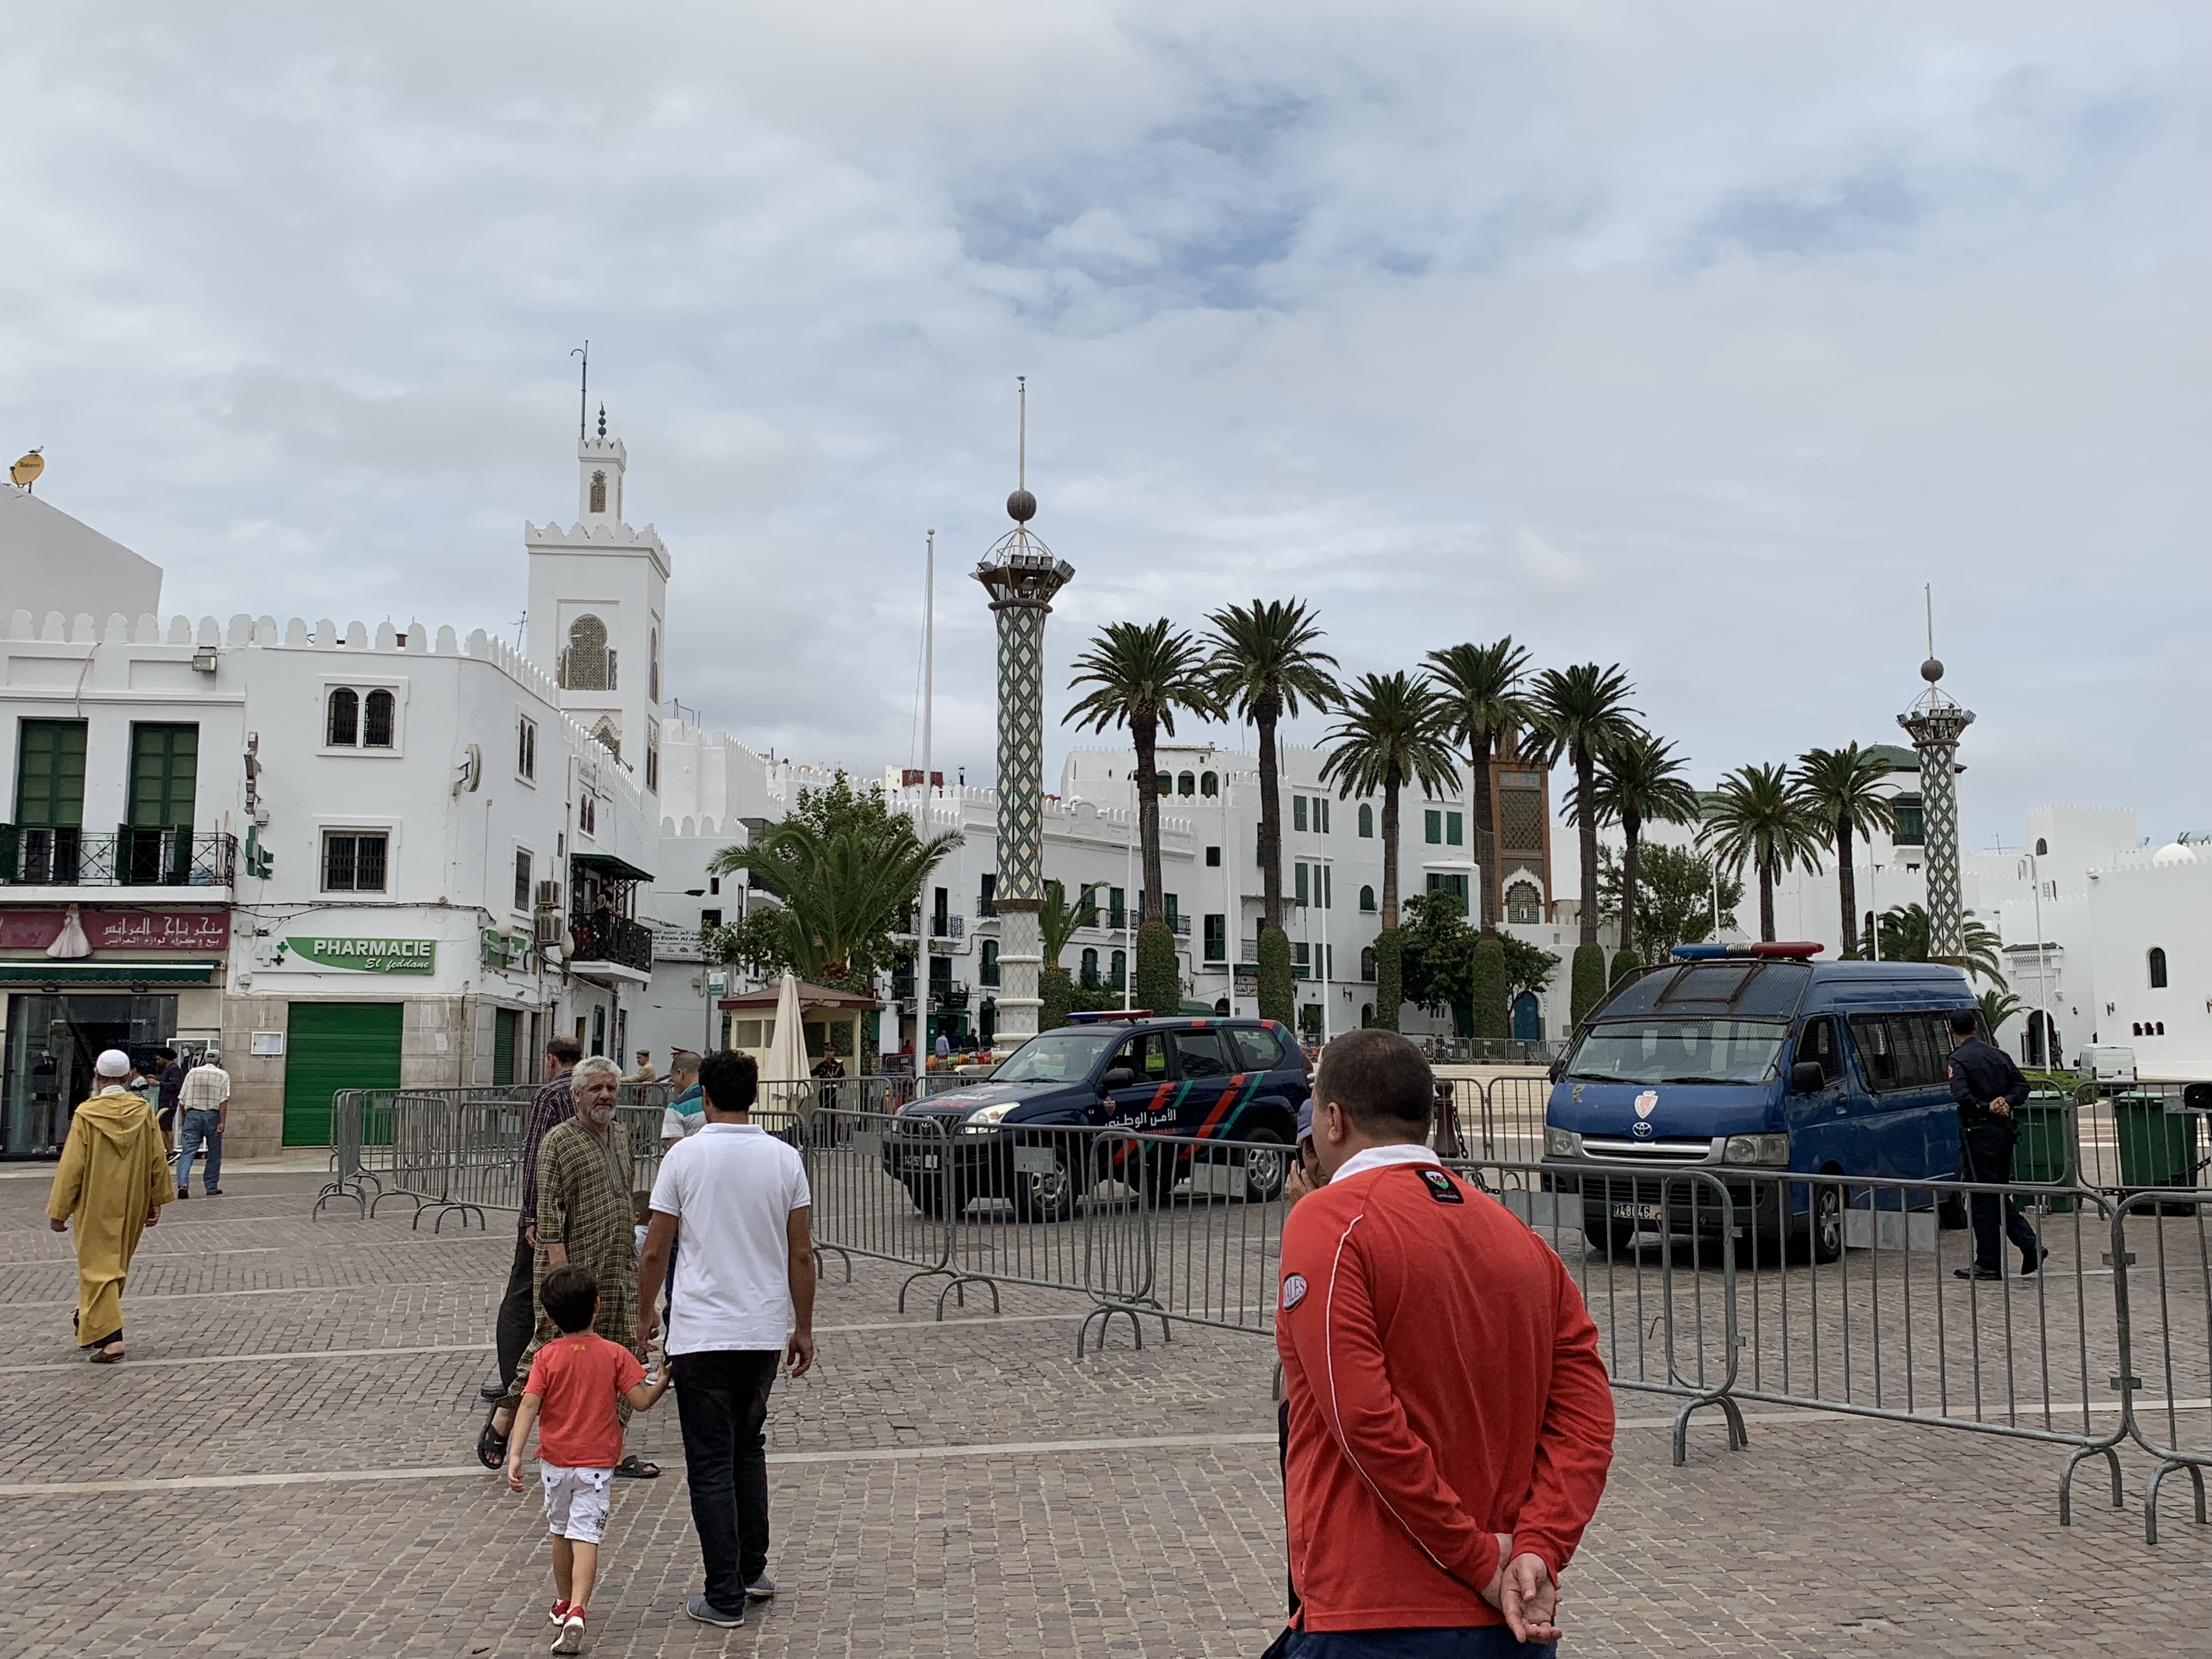 <p>View from the southside of the square toward Avenue Mohamed V, minarets of Zawiya Sidi Ben Aissa and Zawiya Sidi Abdallah El Hach in view</p>